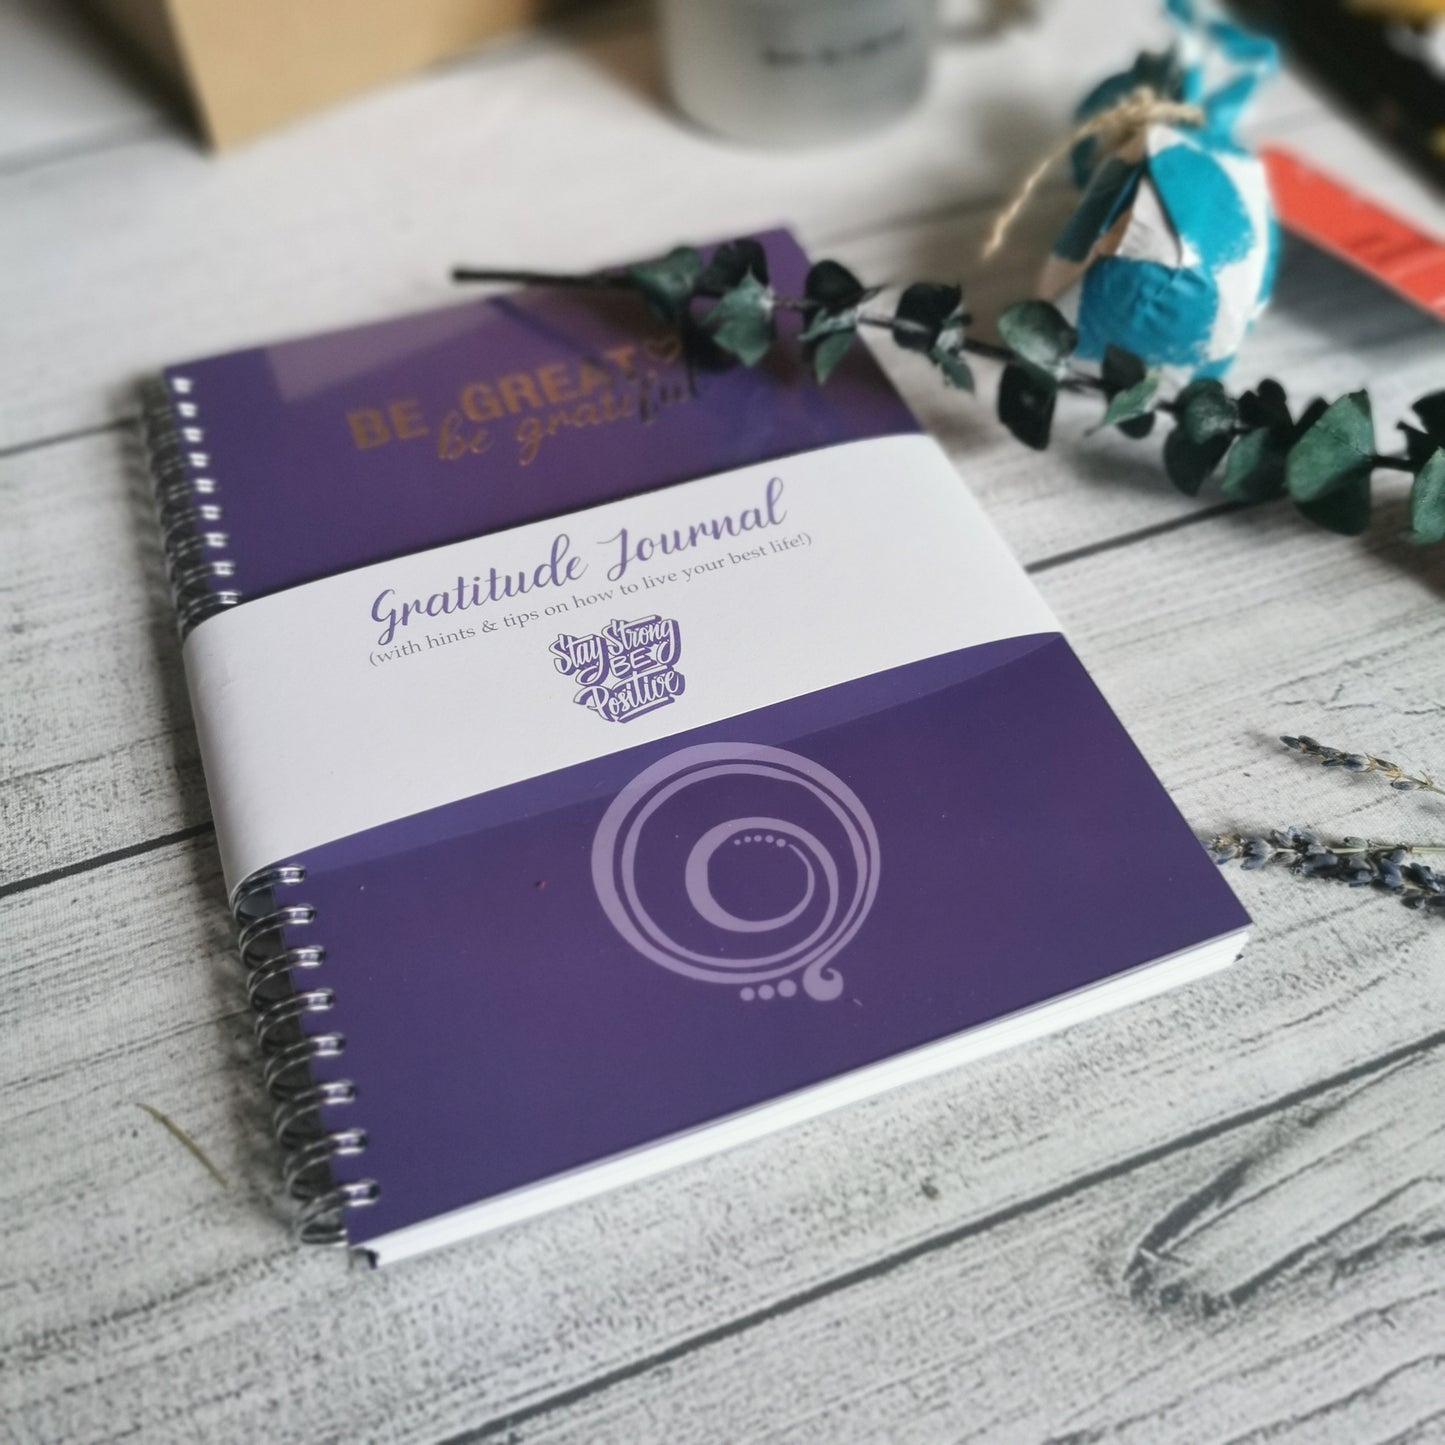 The Gratitude Journal by Positive Attractions